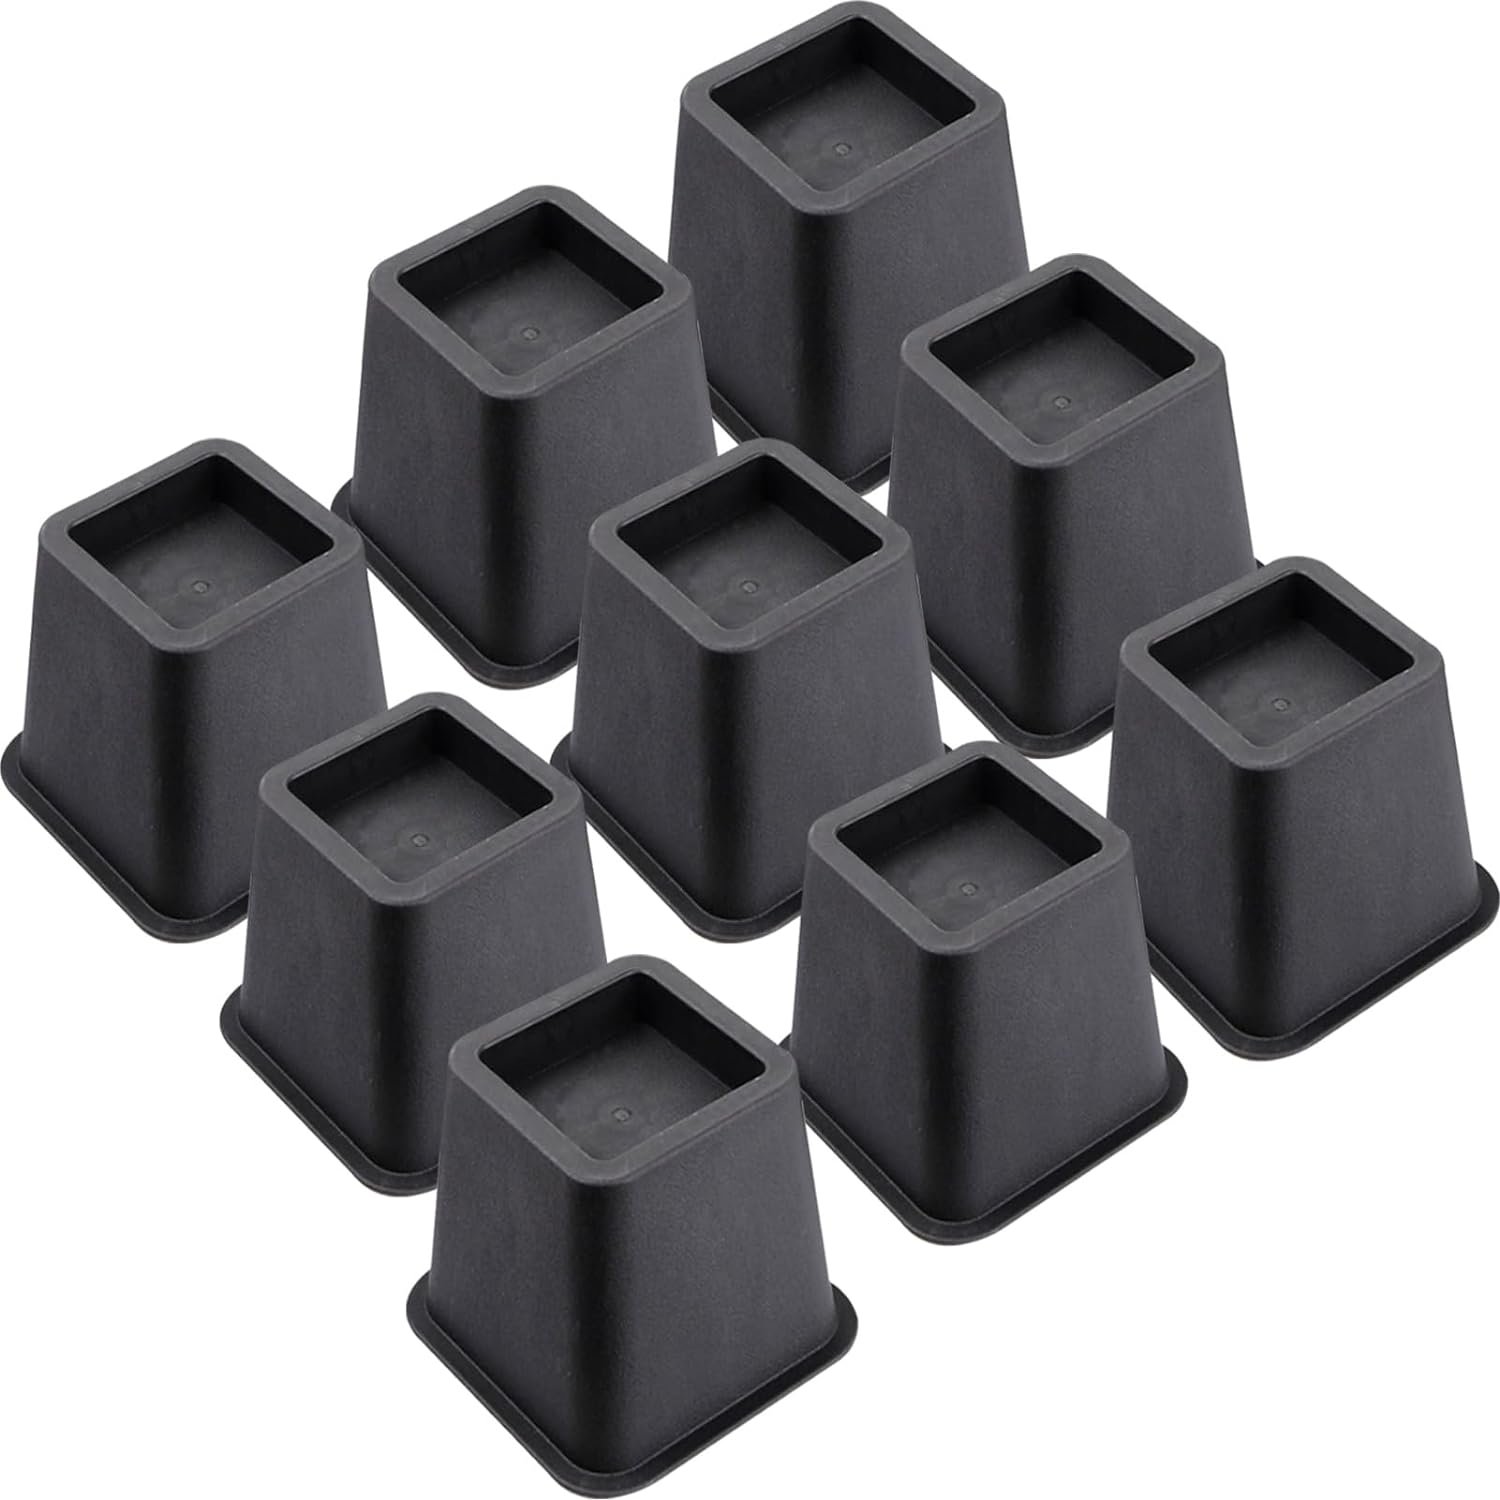 Bed Risers 3 Inch/5Inch, Heavy Duty Furniture Risers, Bed Elevators for Sofa Desk Chair, Lifts Up to 1,500 lb, Set of 9/8, Black (3inch)